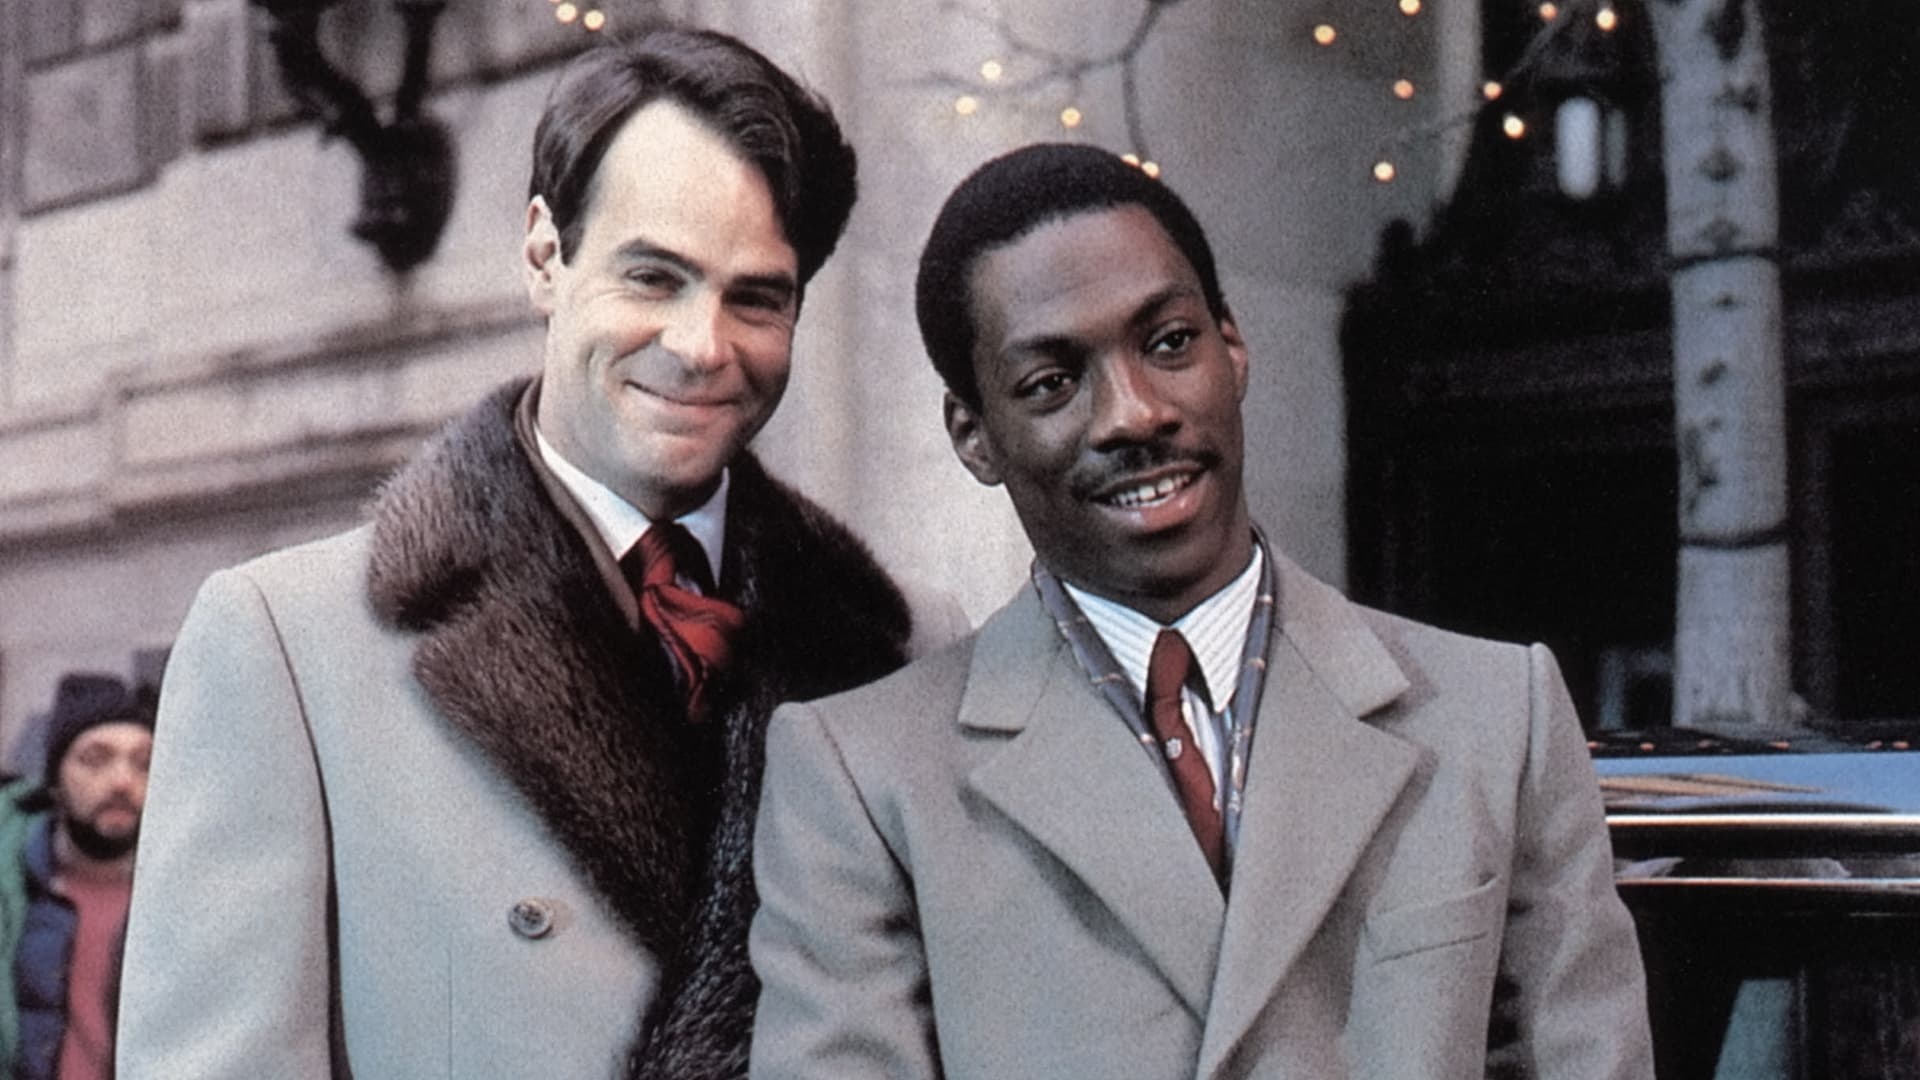 Trading Places, Film backdrop, Classic comedy, Unforgettable moments, 1920x1080 Full HD Desktop